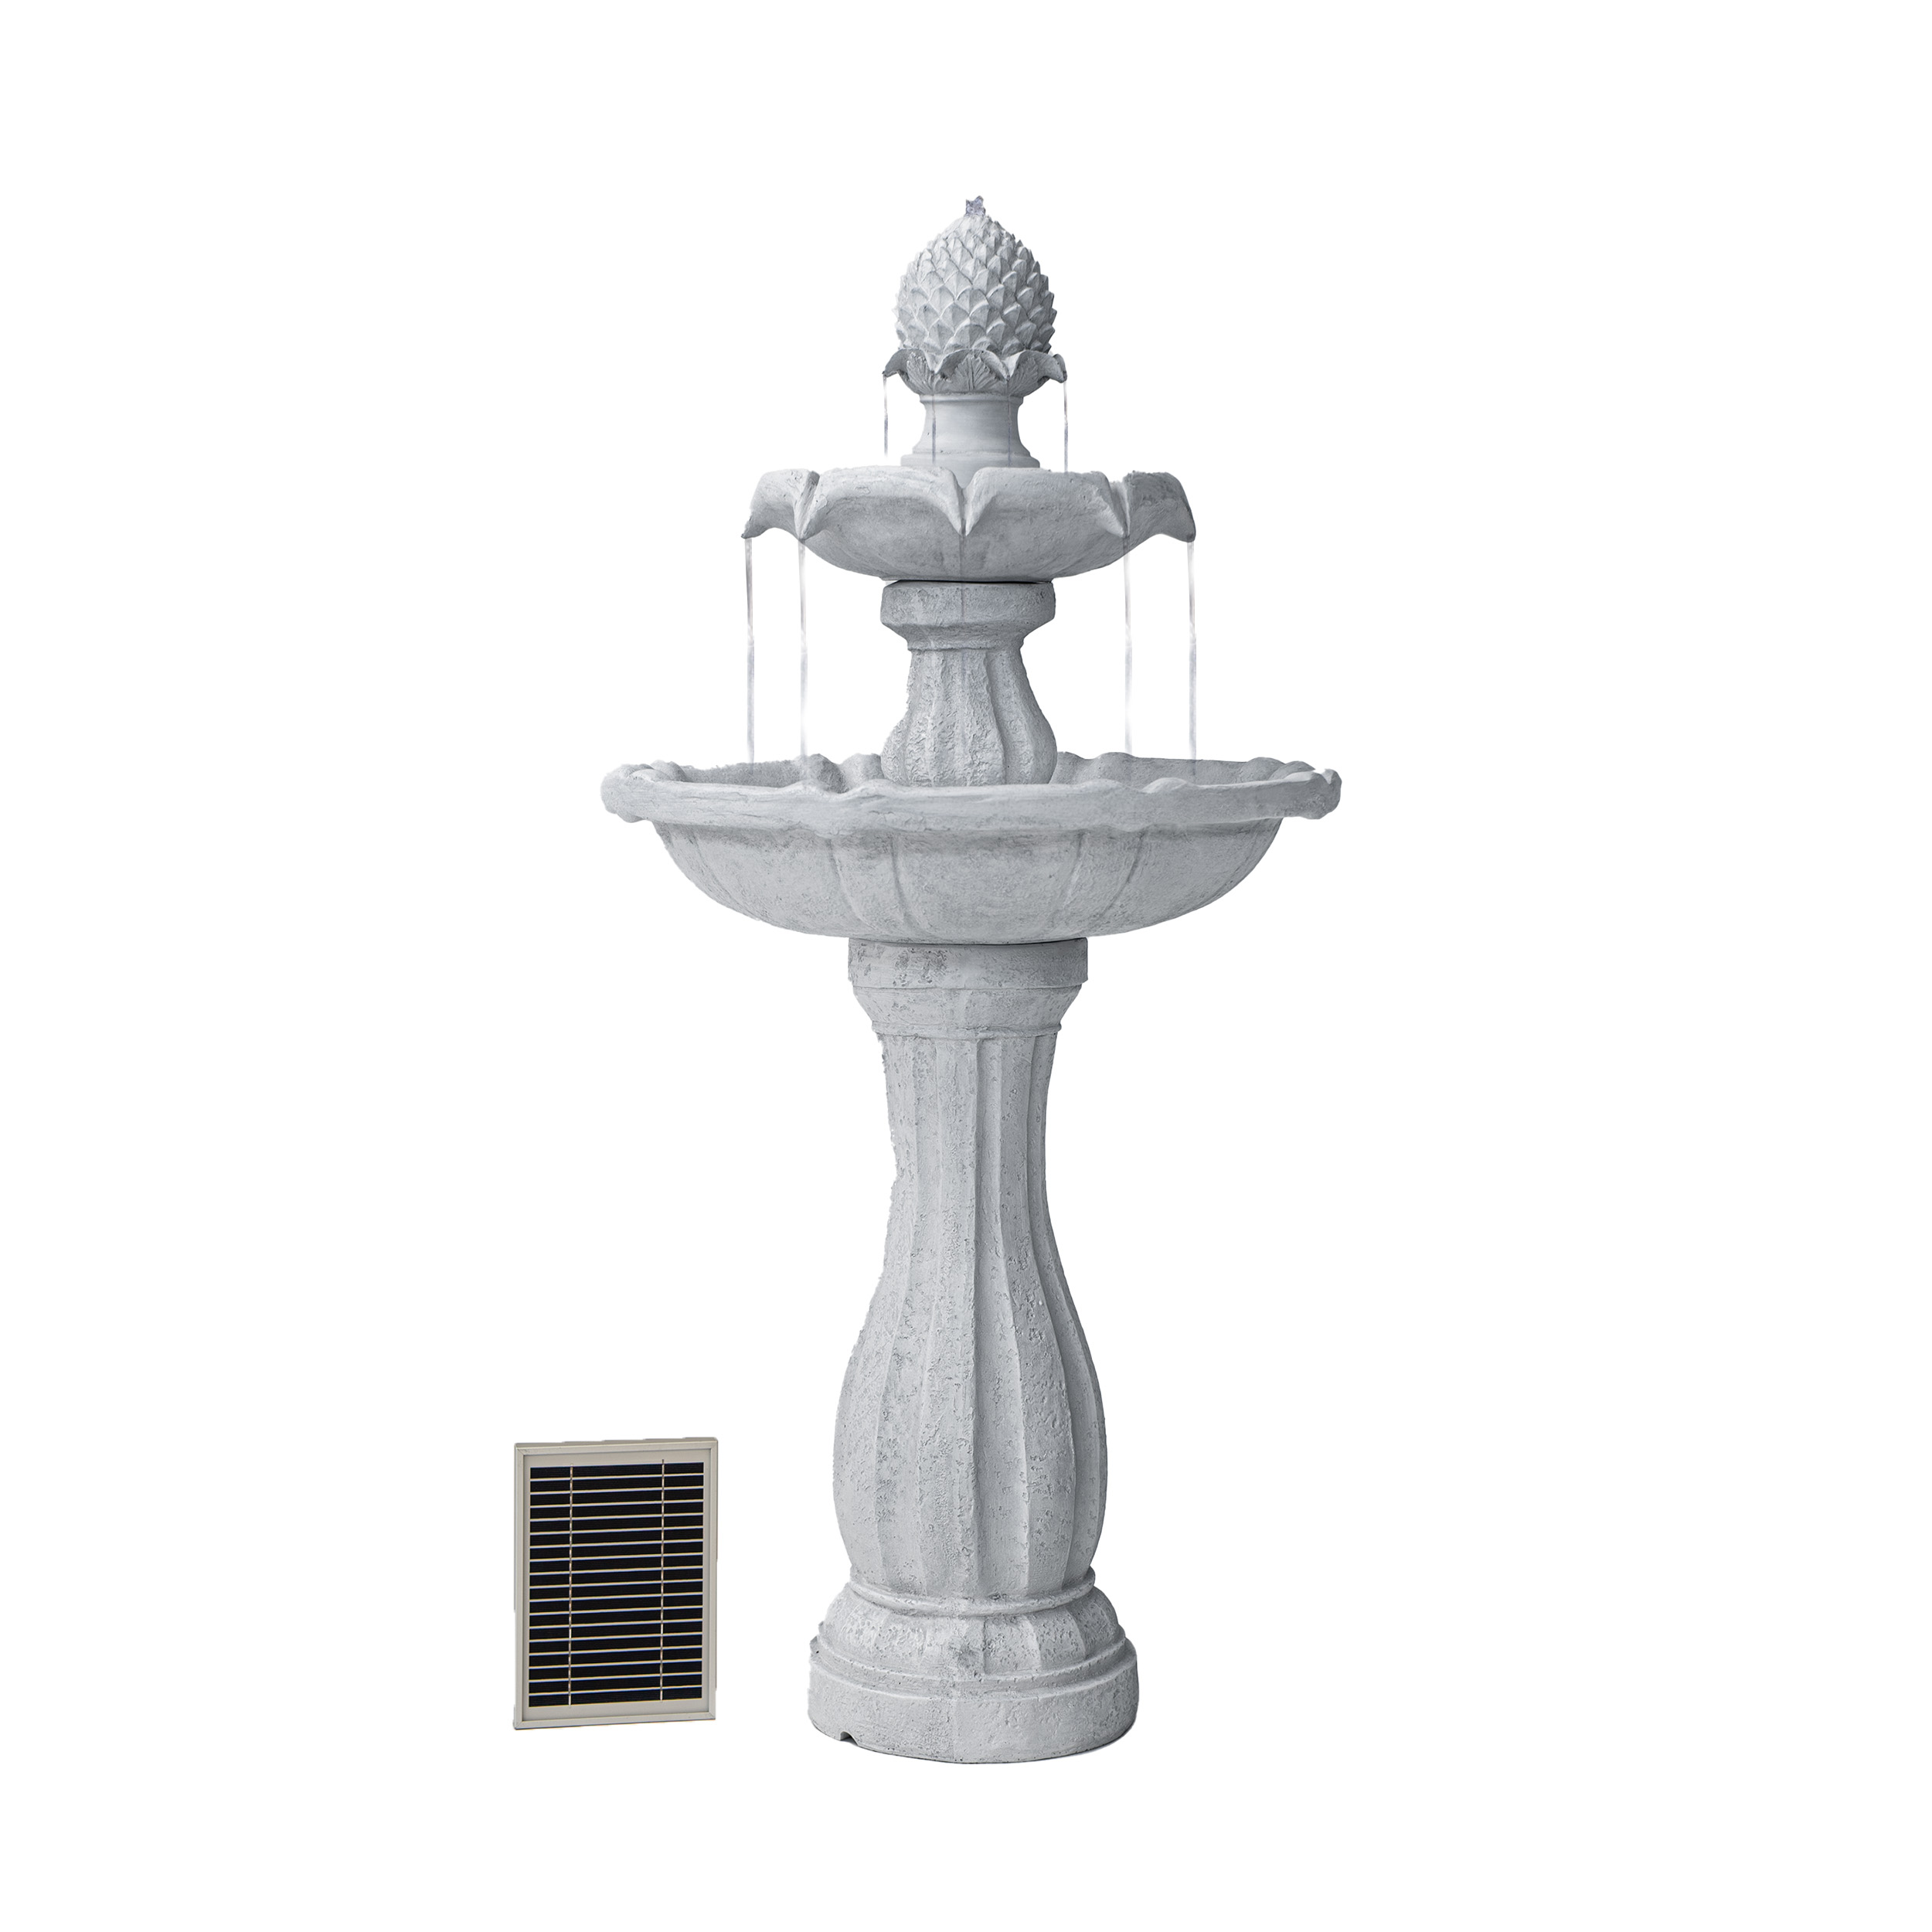 Shop our wide selection of Xbrand solar powered water fountains. This 2-tier outdoor water fountain includes an auto shut off pump, decreasing the amount of maintenance.